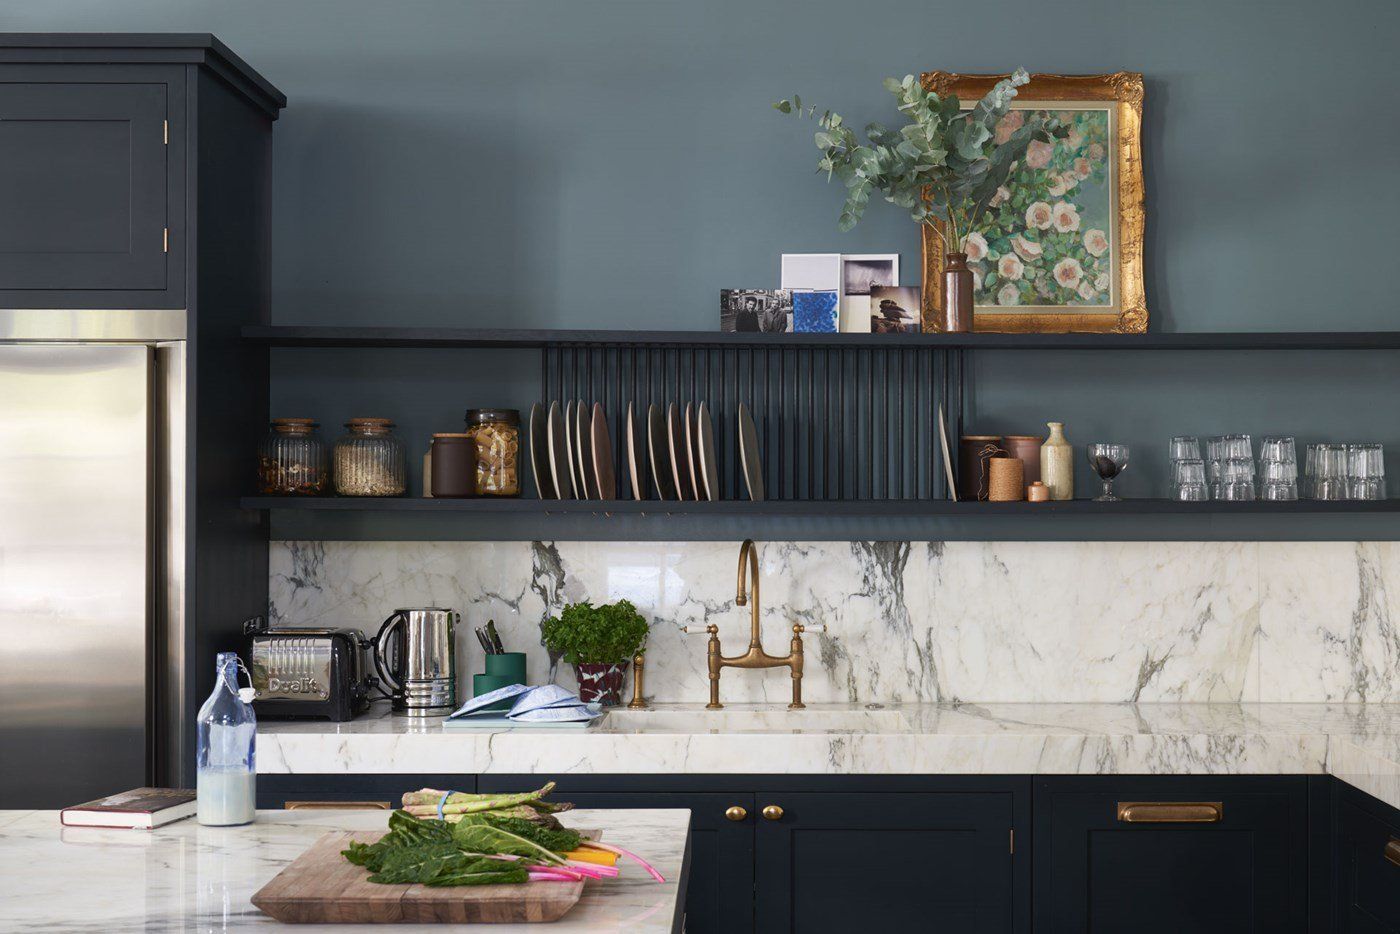 20 Kitchen Trends   What Styles Are In for Kitchens in 20